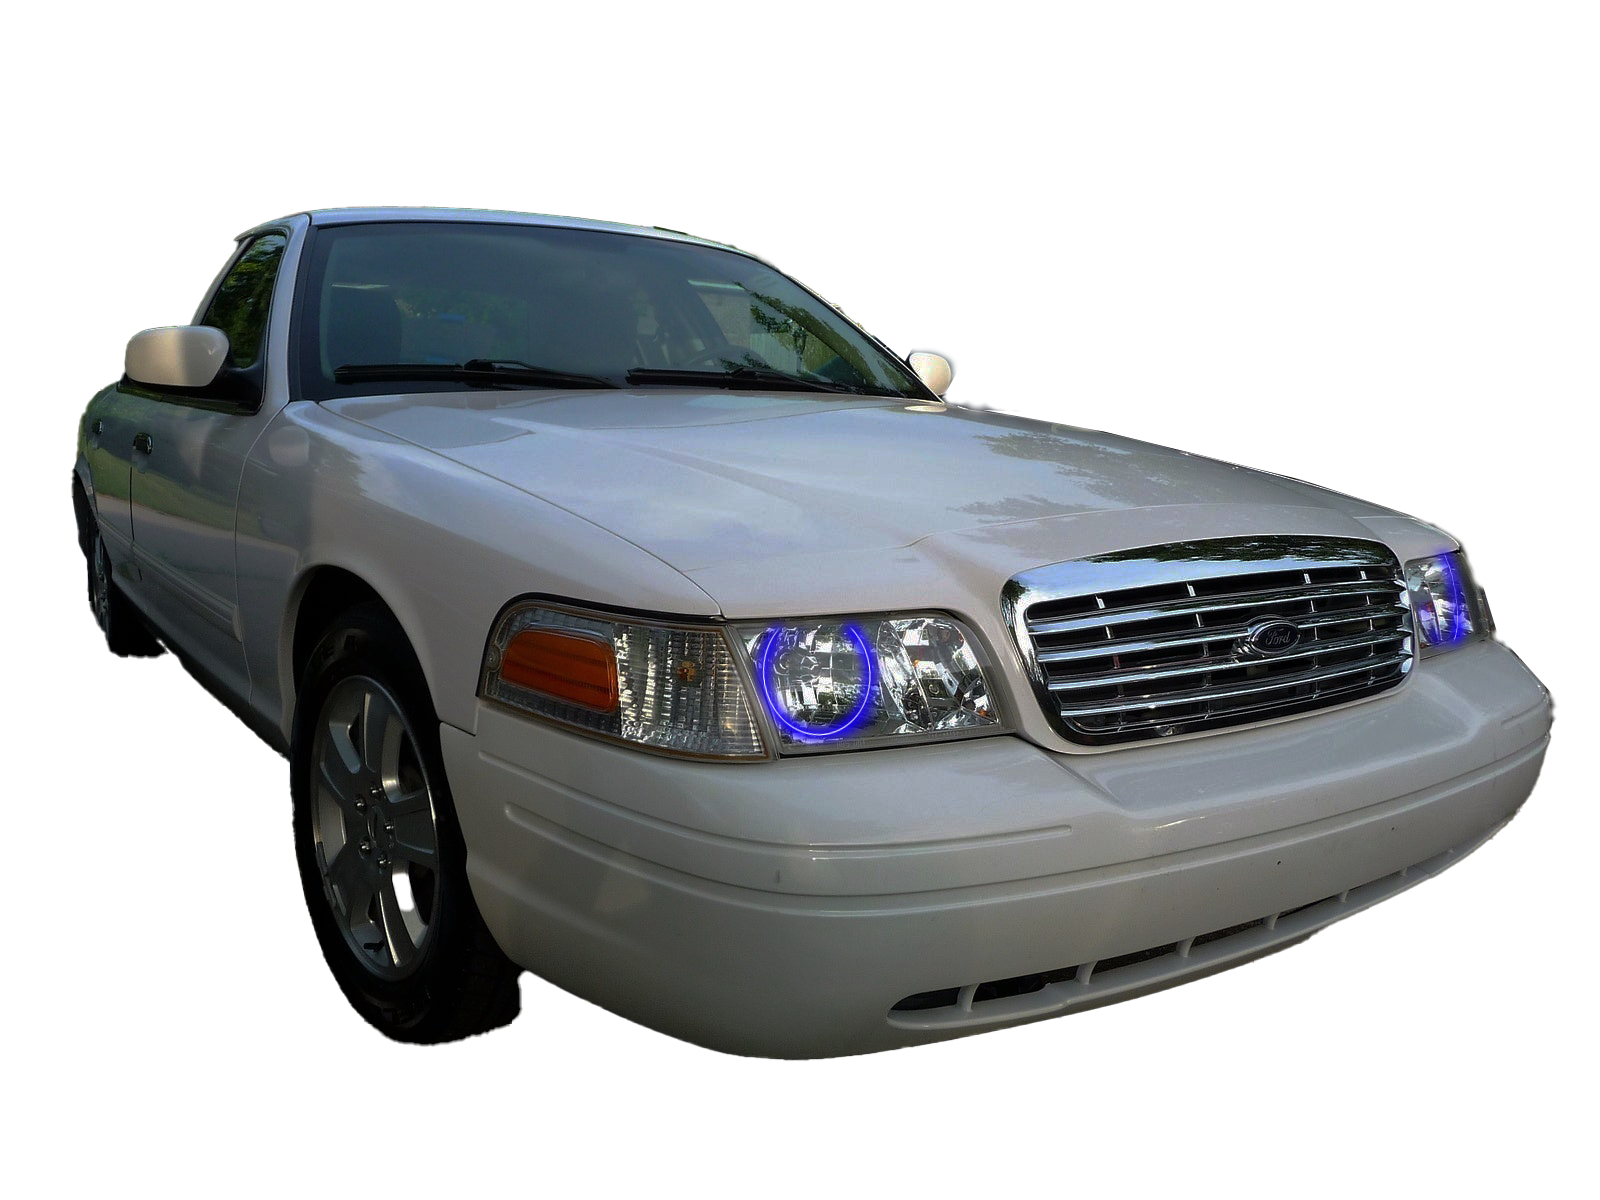 1998-2011 Ford Crown Victoria Multicolor Halo Kit - RGB Halo Kits Multicolor Flow Series Color Chasing RGBWA LED headlight kit Colorshift Oracle Lighting Trendz OneUpLighting Morimoto theretrofitsource AutoLEDTech Diode Dynamics